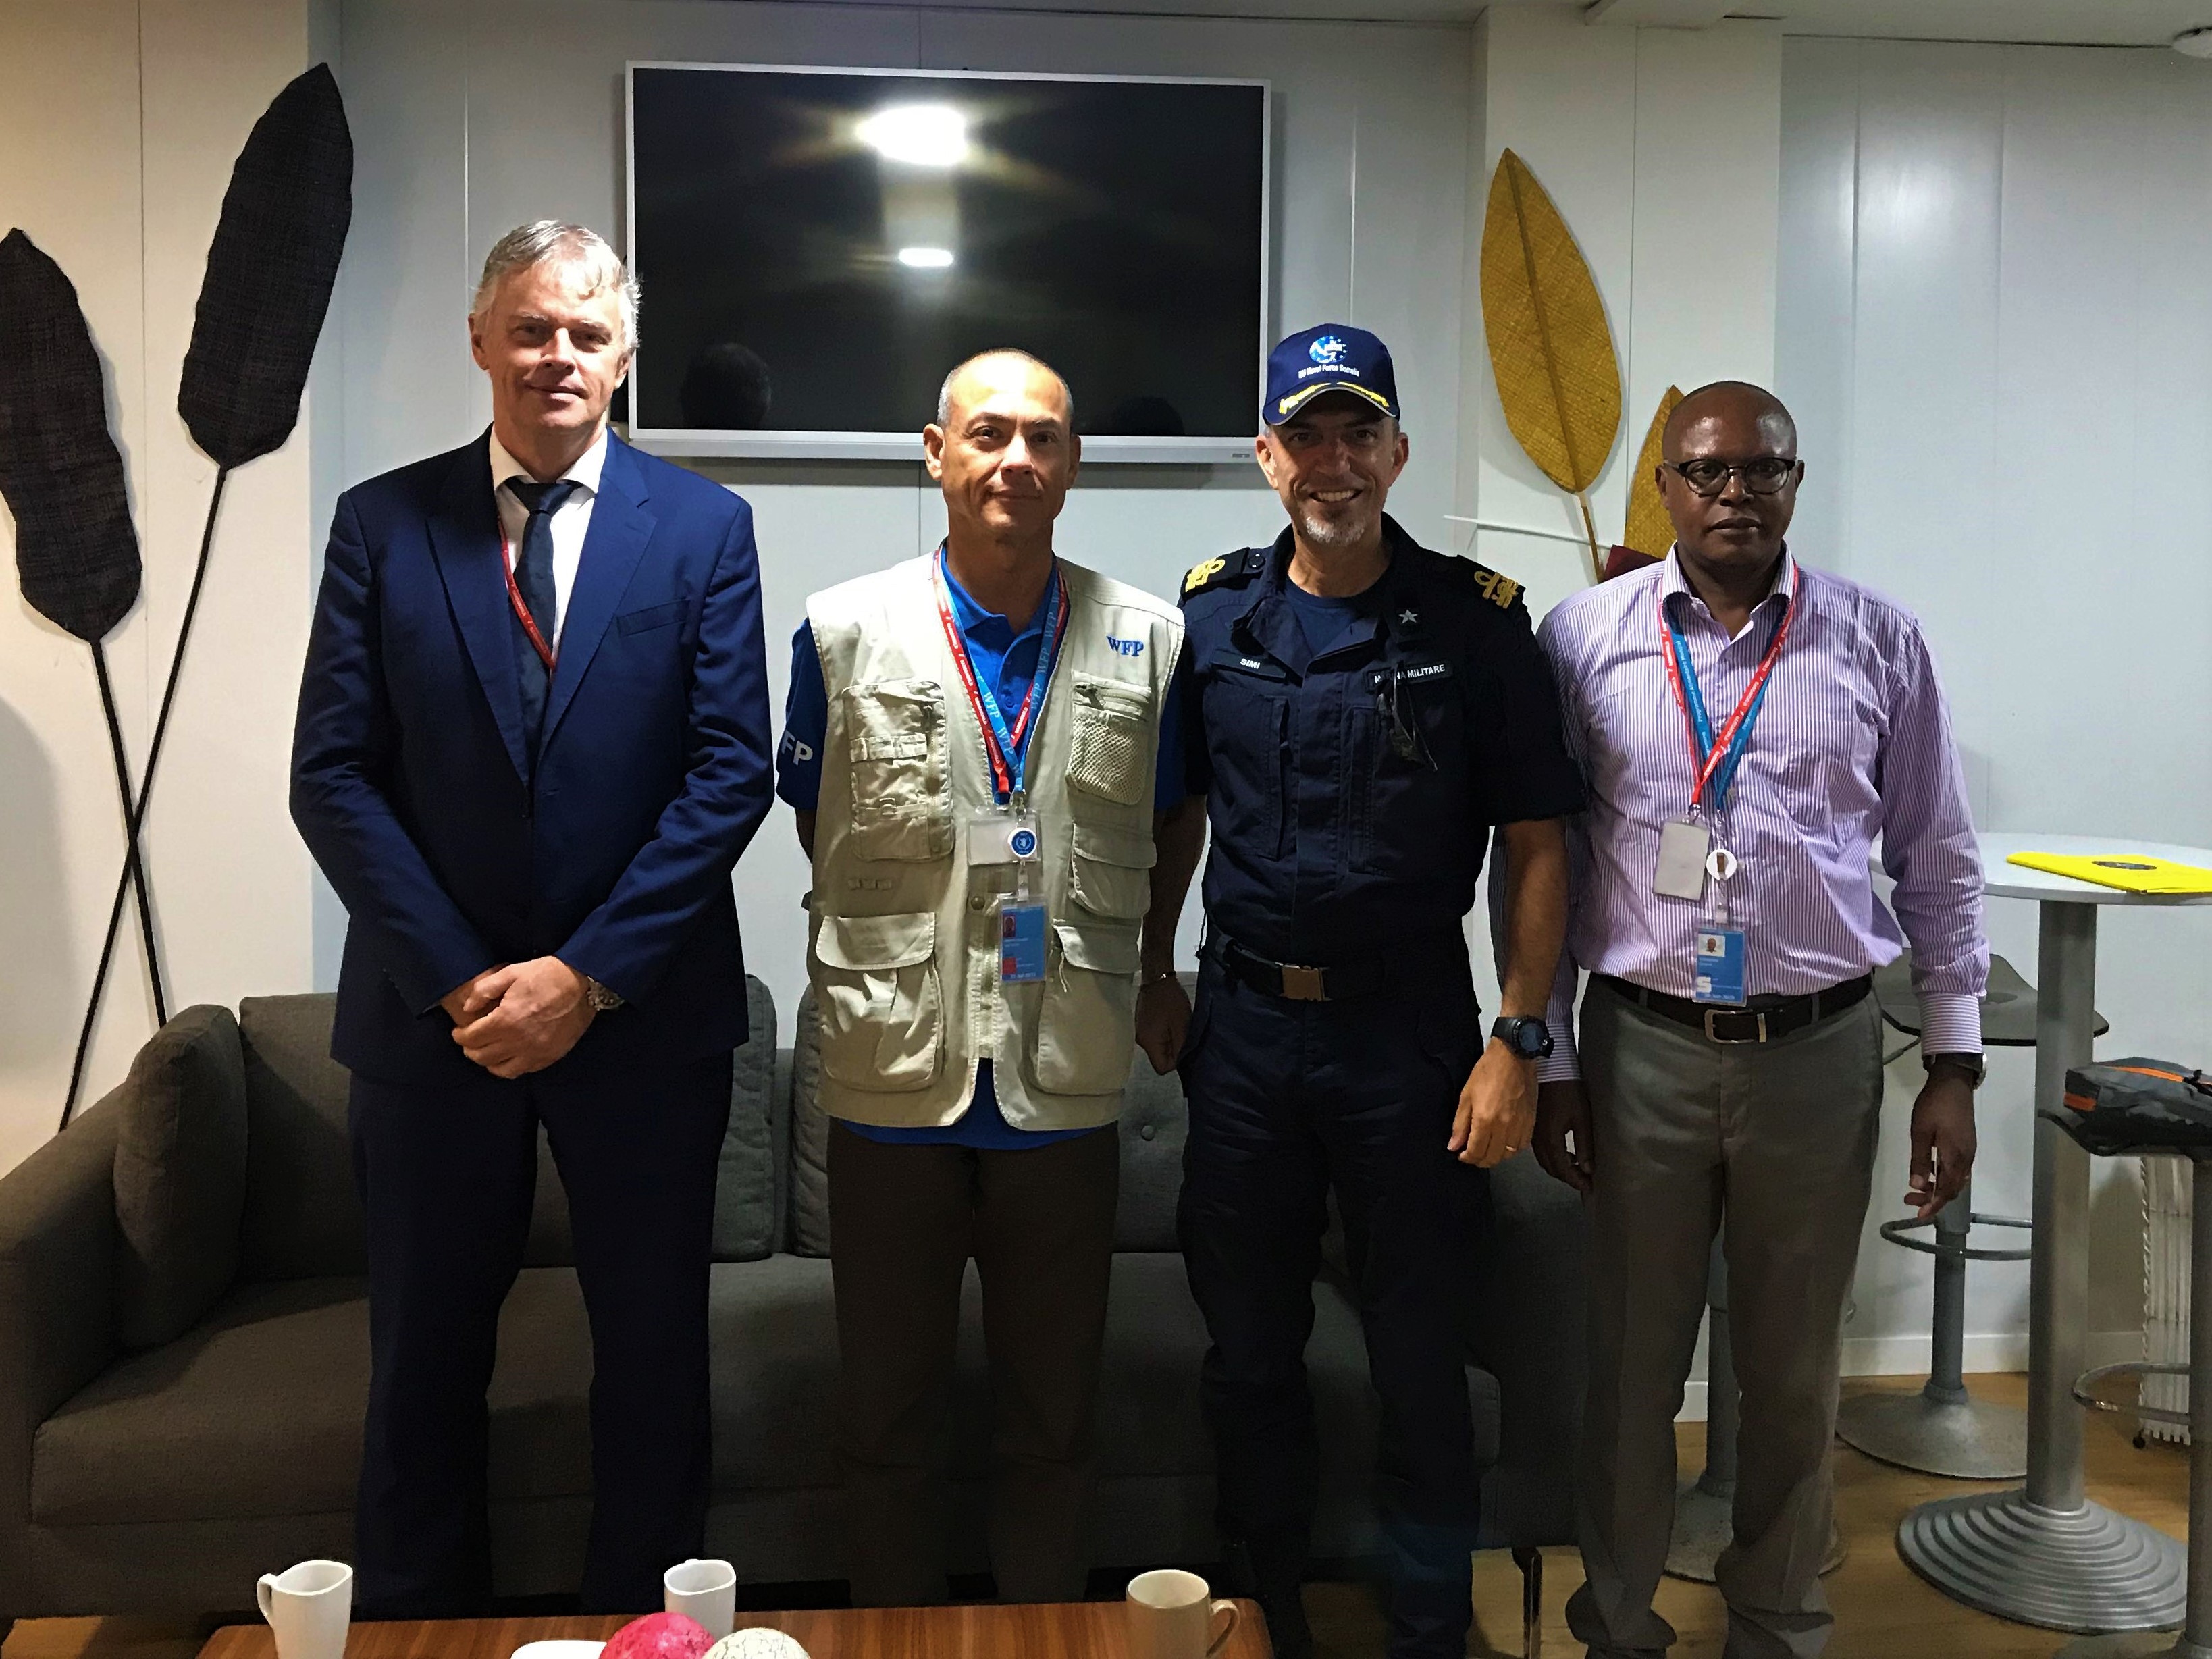 R. Adm. Simi meets with representatives of World Food Program (WFP) and the Food and Agriculture Organization of the United Nations (UNFAO) in Mogadishu.